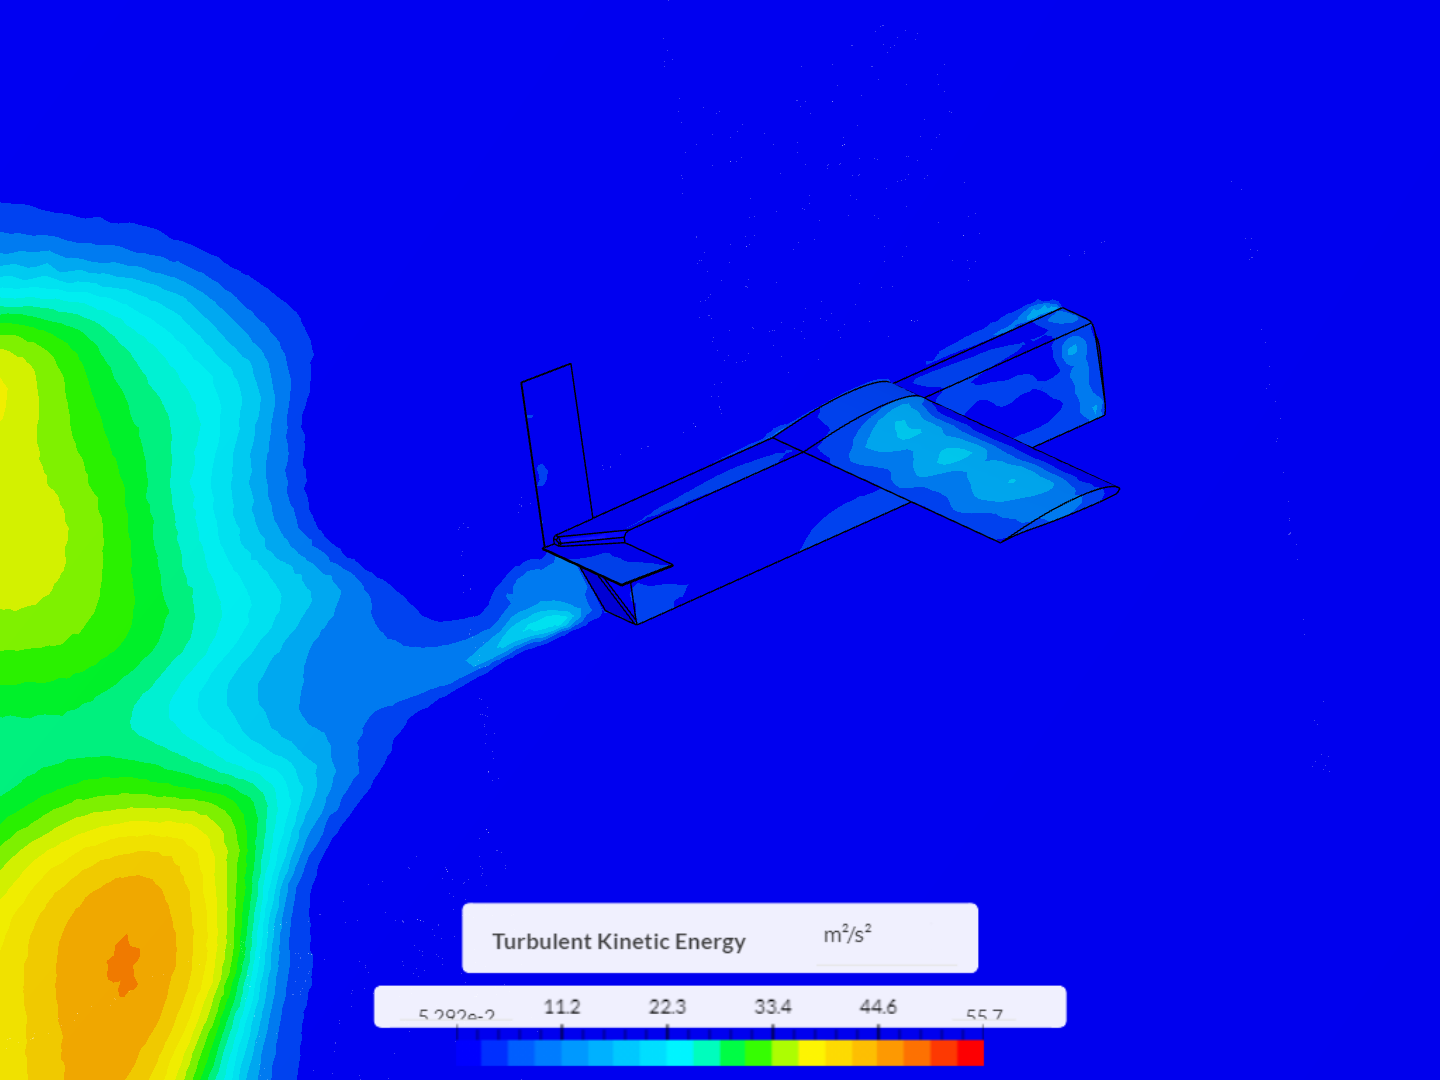 AIAA 2021 airplane - CFD analysis - test 2 image